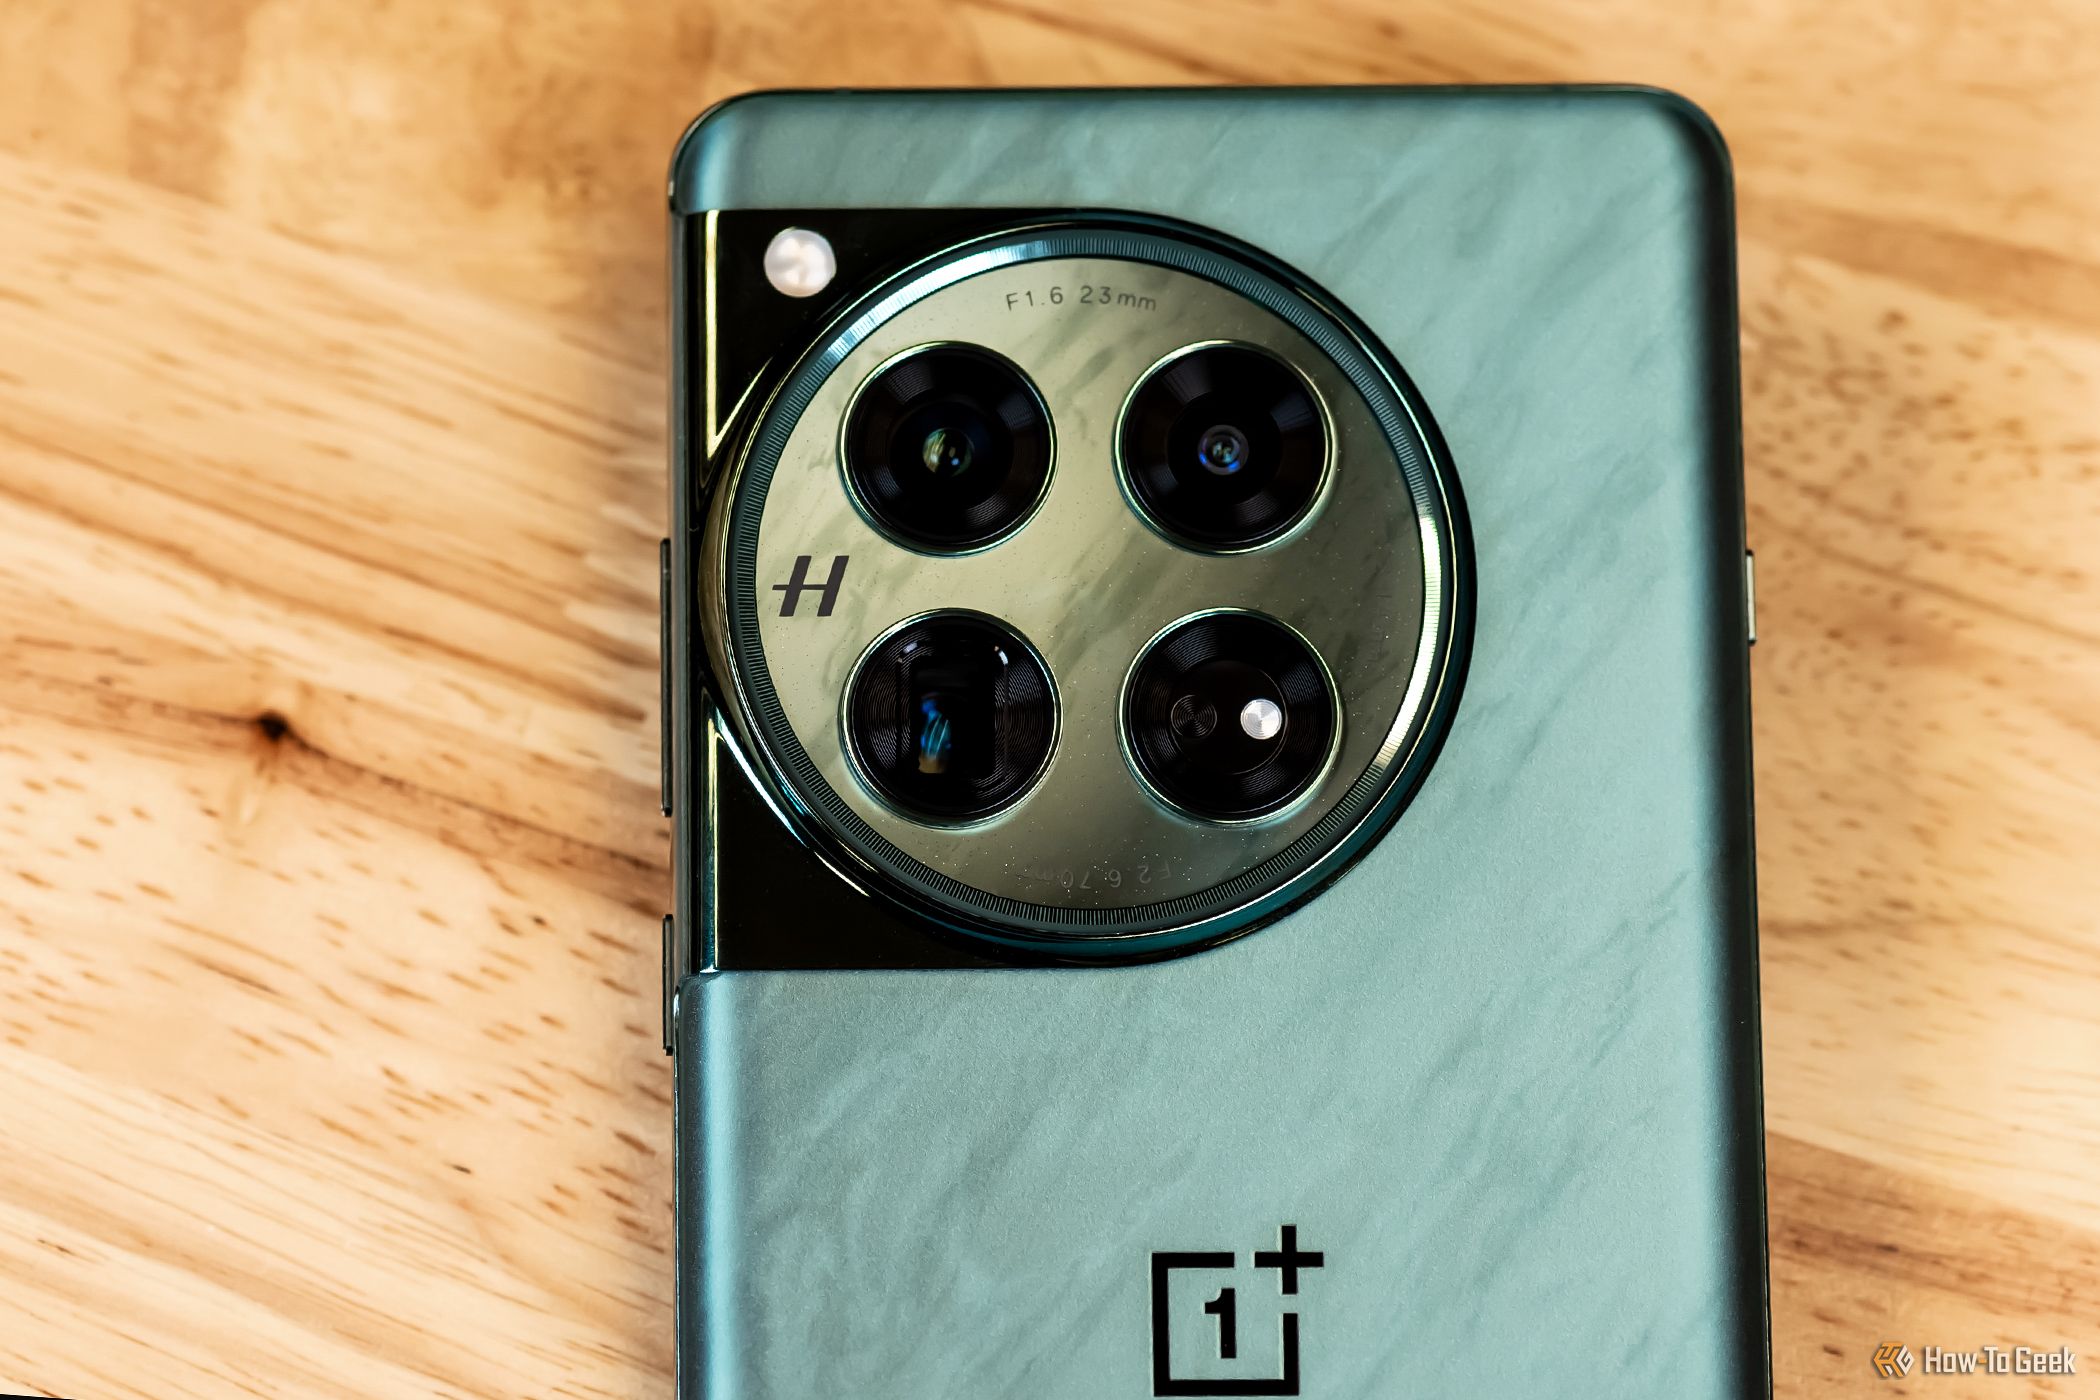 OnePlus Camera on the back with 4 lenses